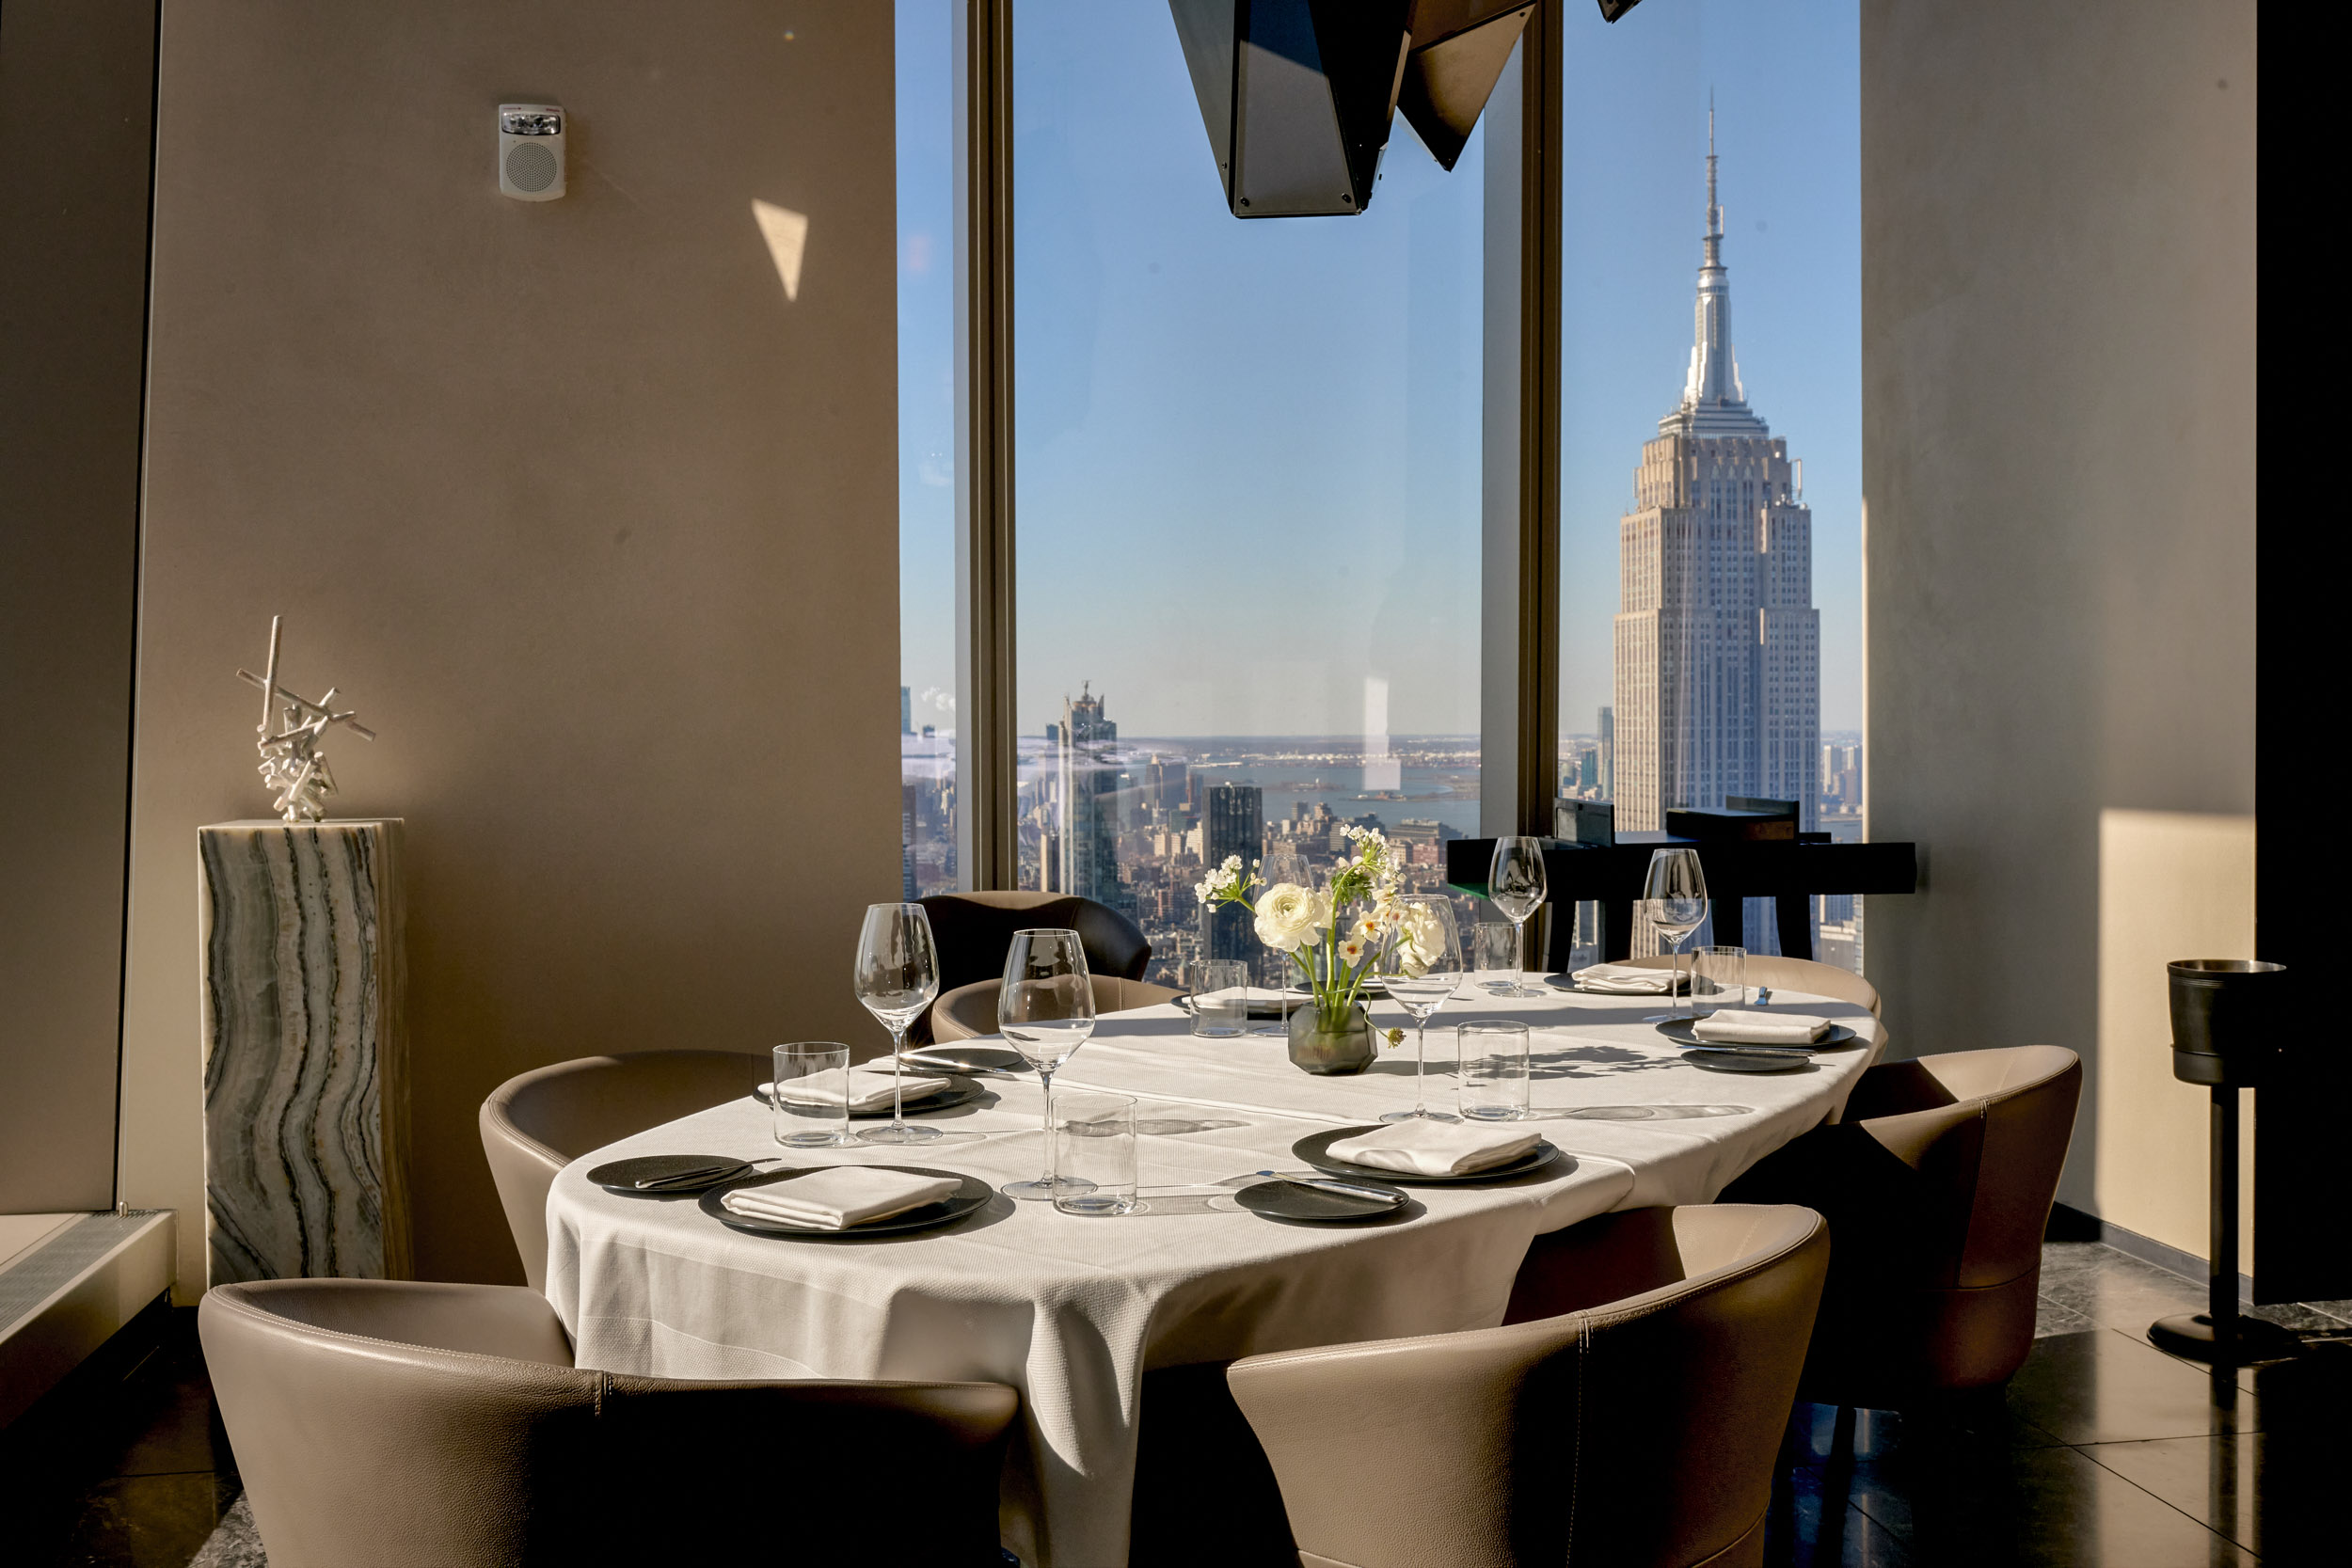 A private dining room at American Express’s&nbsp;Centurion New York restaurant, located on the 55th floor of the One Vanderbilt tower.